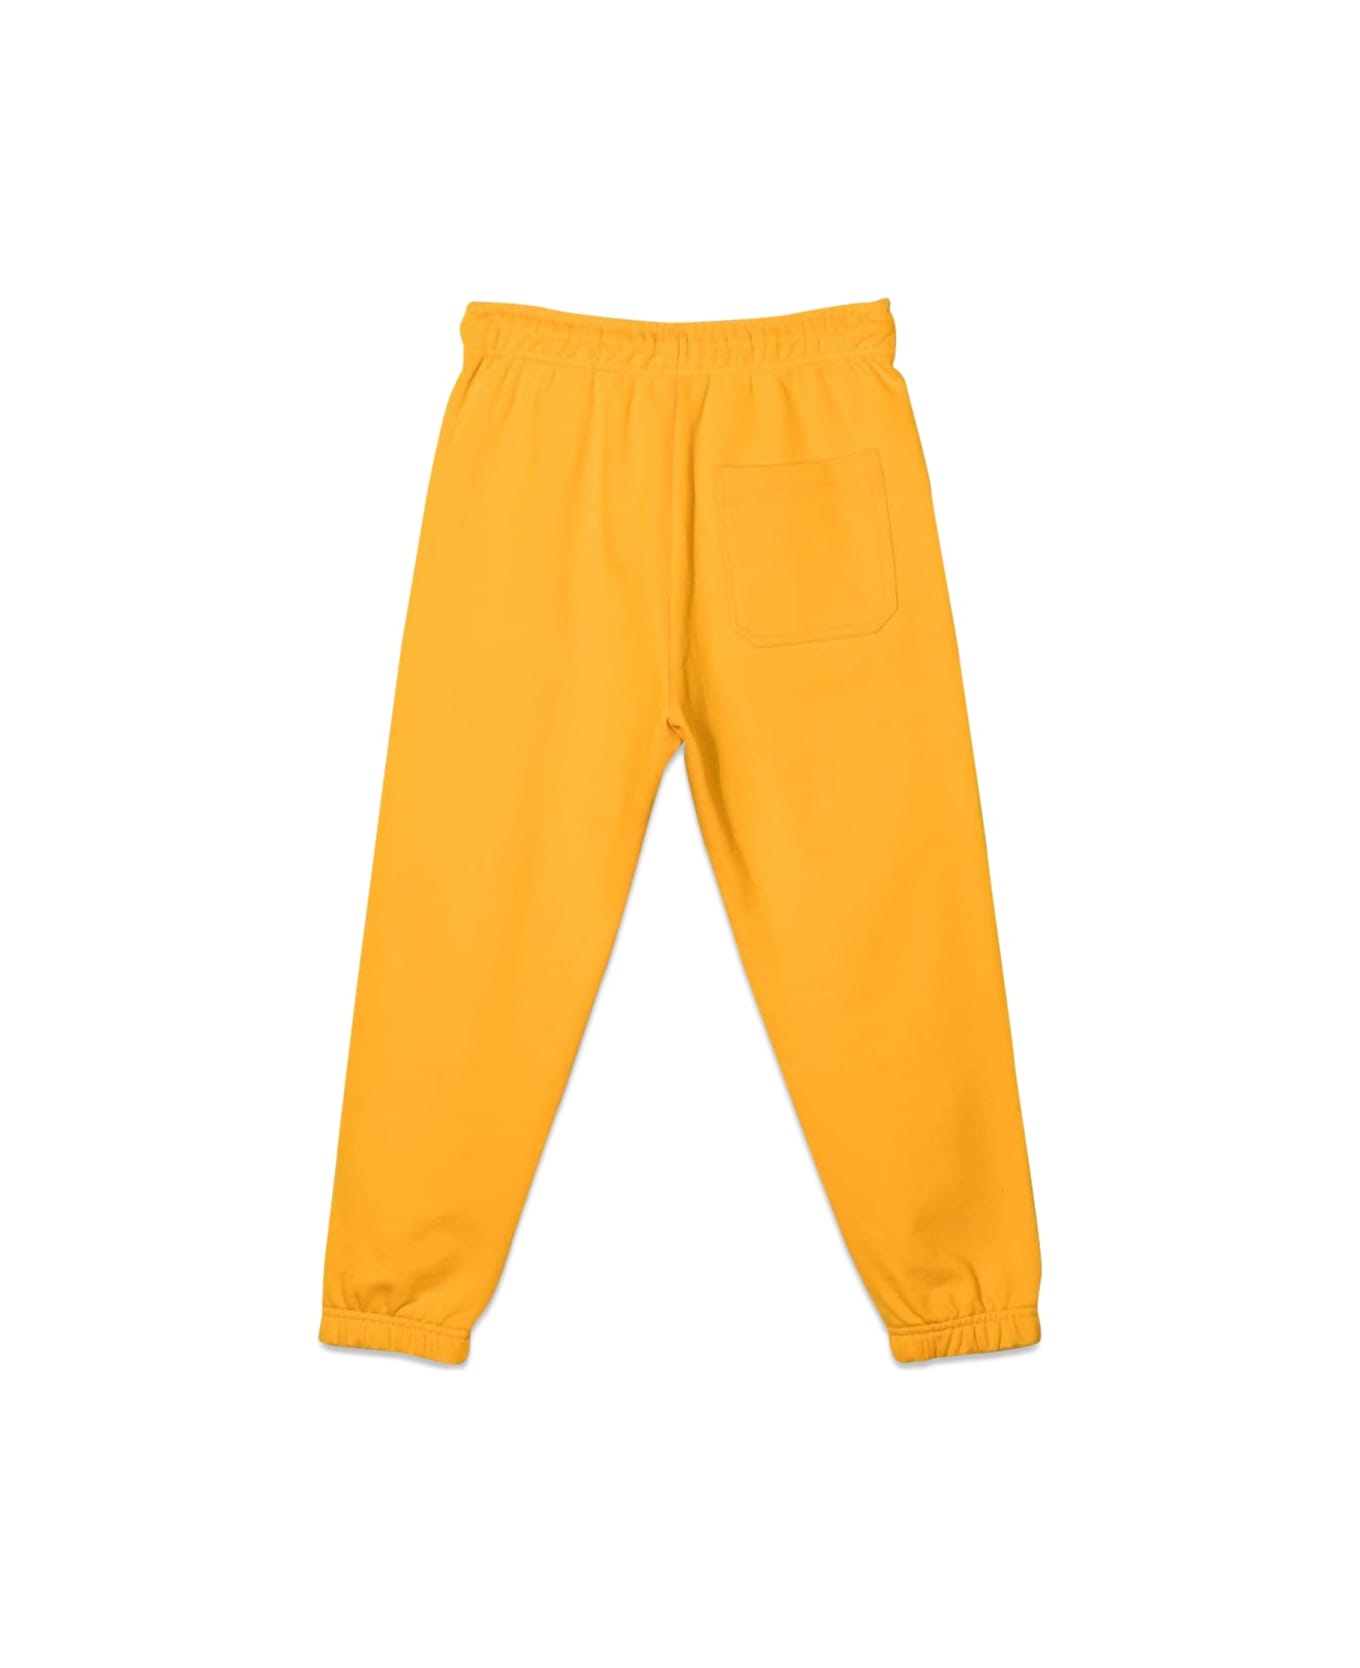 Diesel Jogger With Logo - YELLOW ボトムス